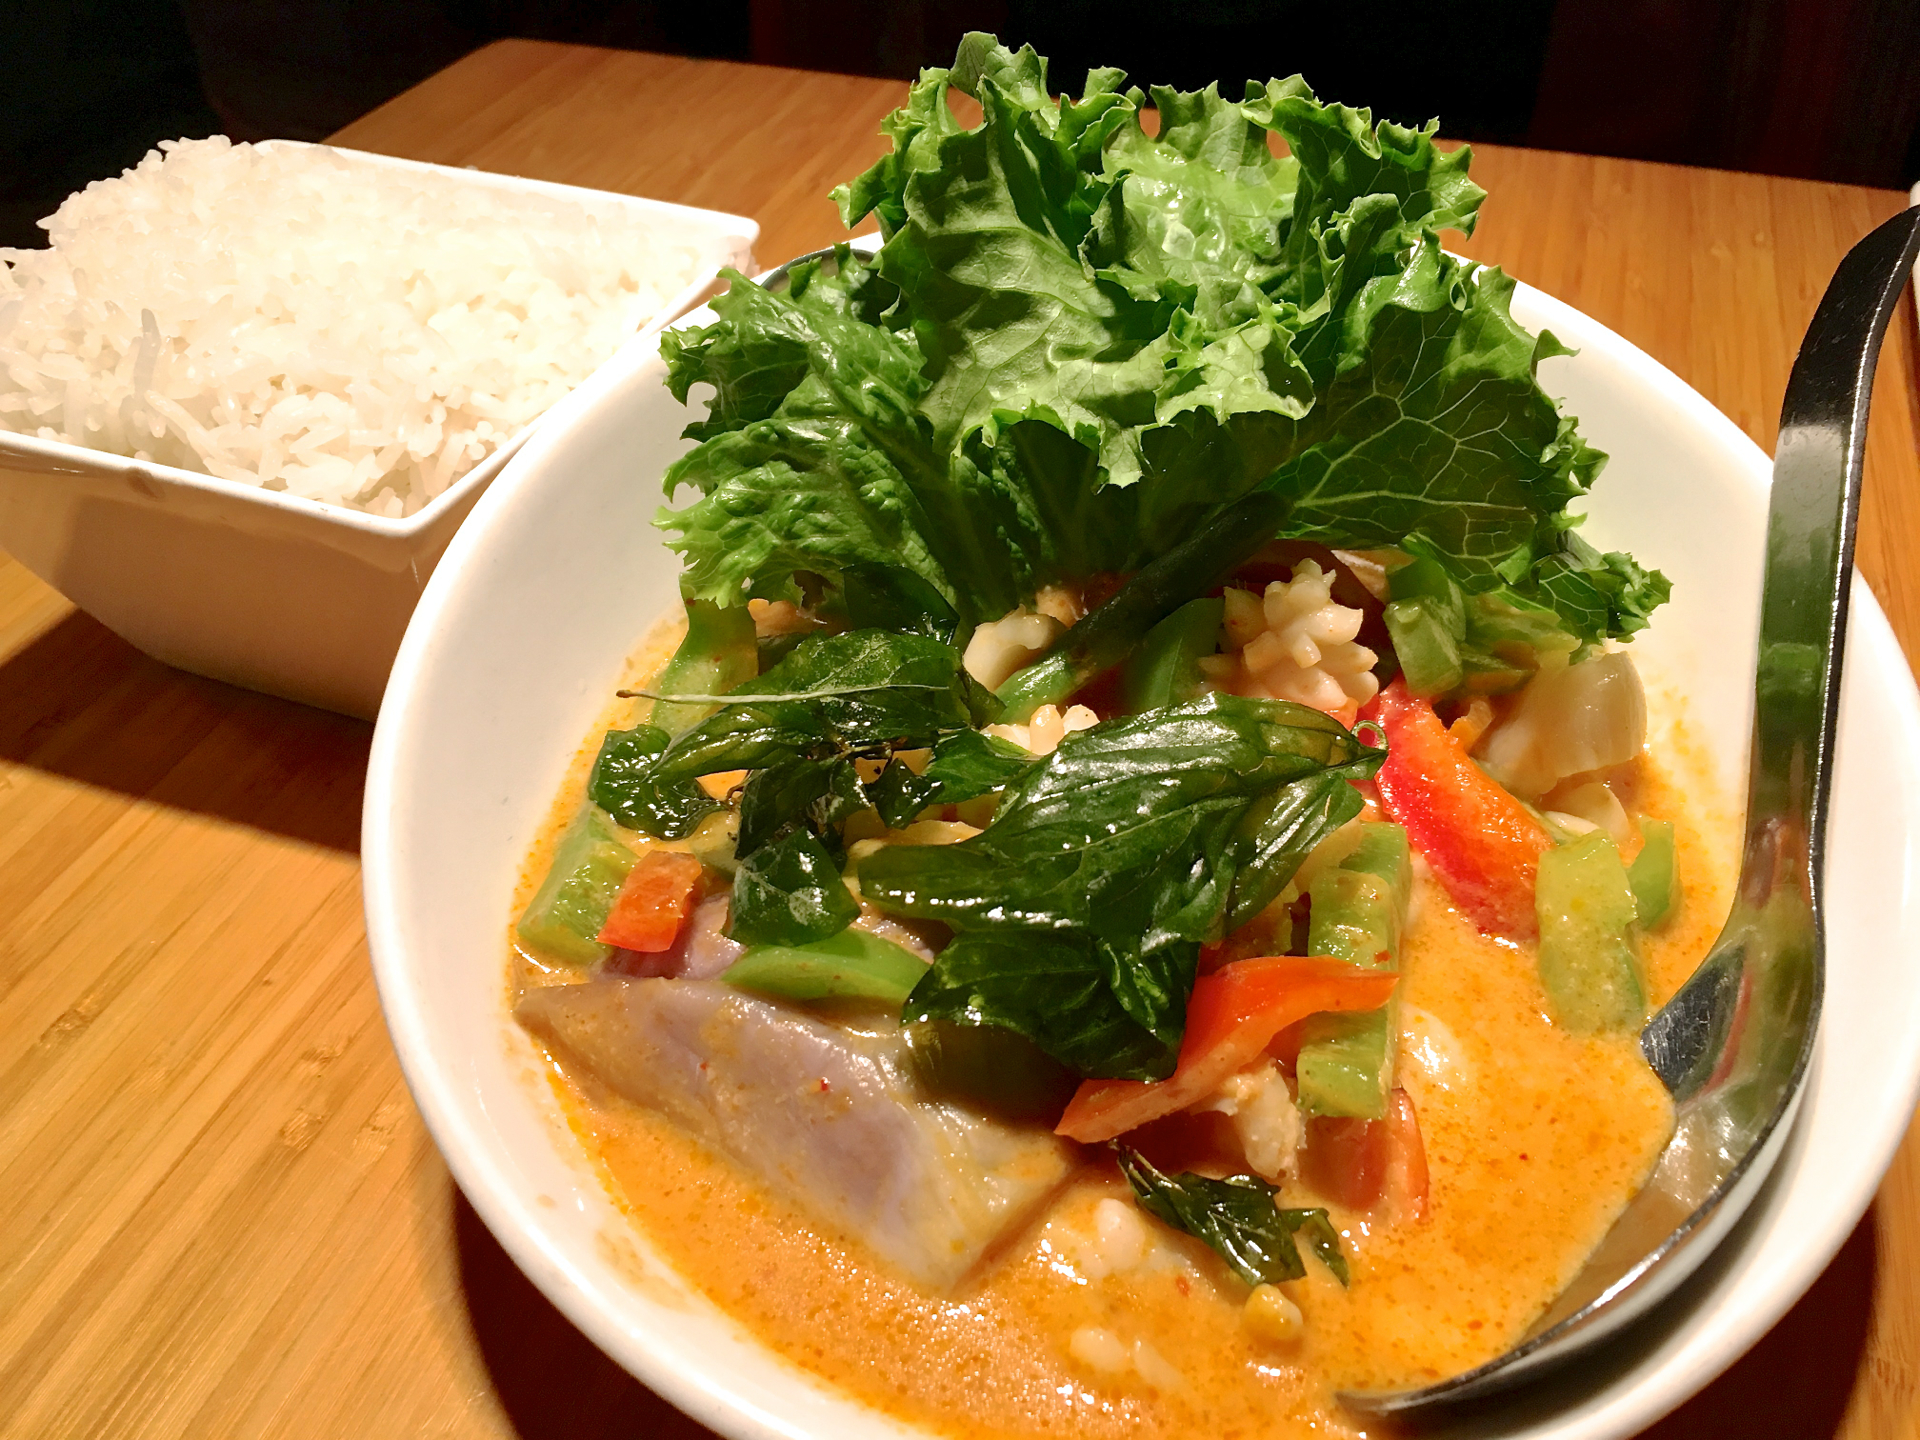 The Foster City Sea Curry at Sweet Basil Thai Cuisine.